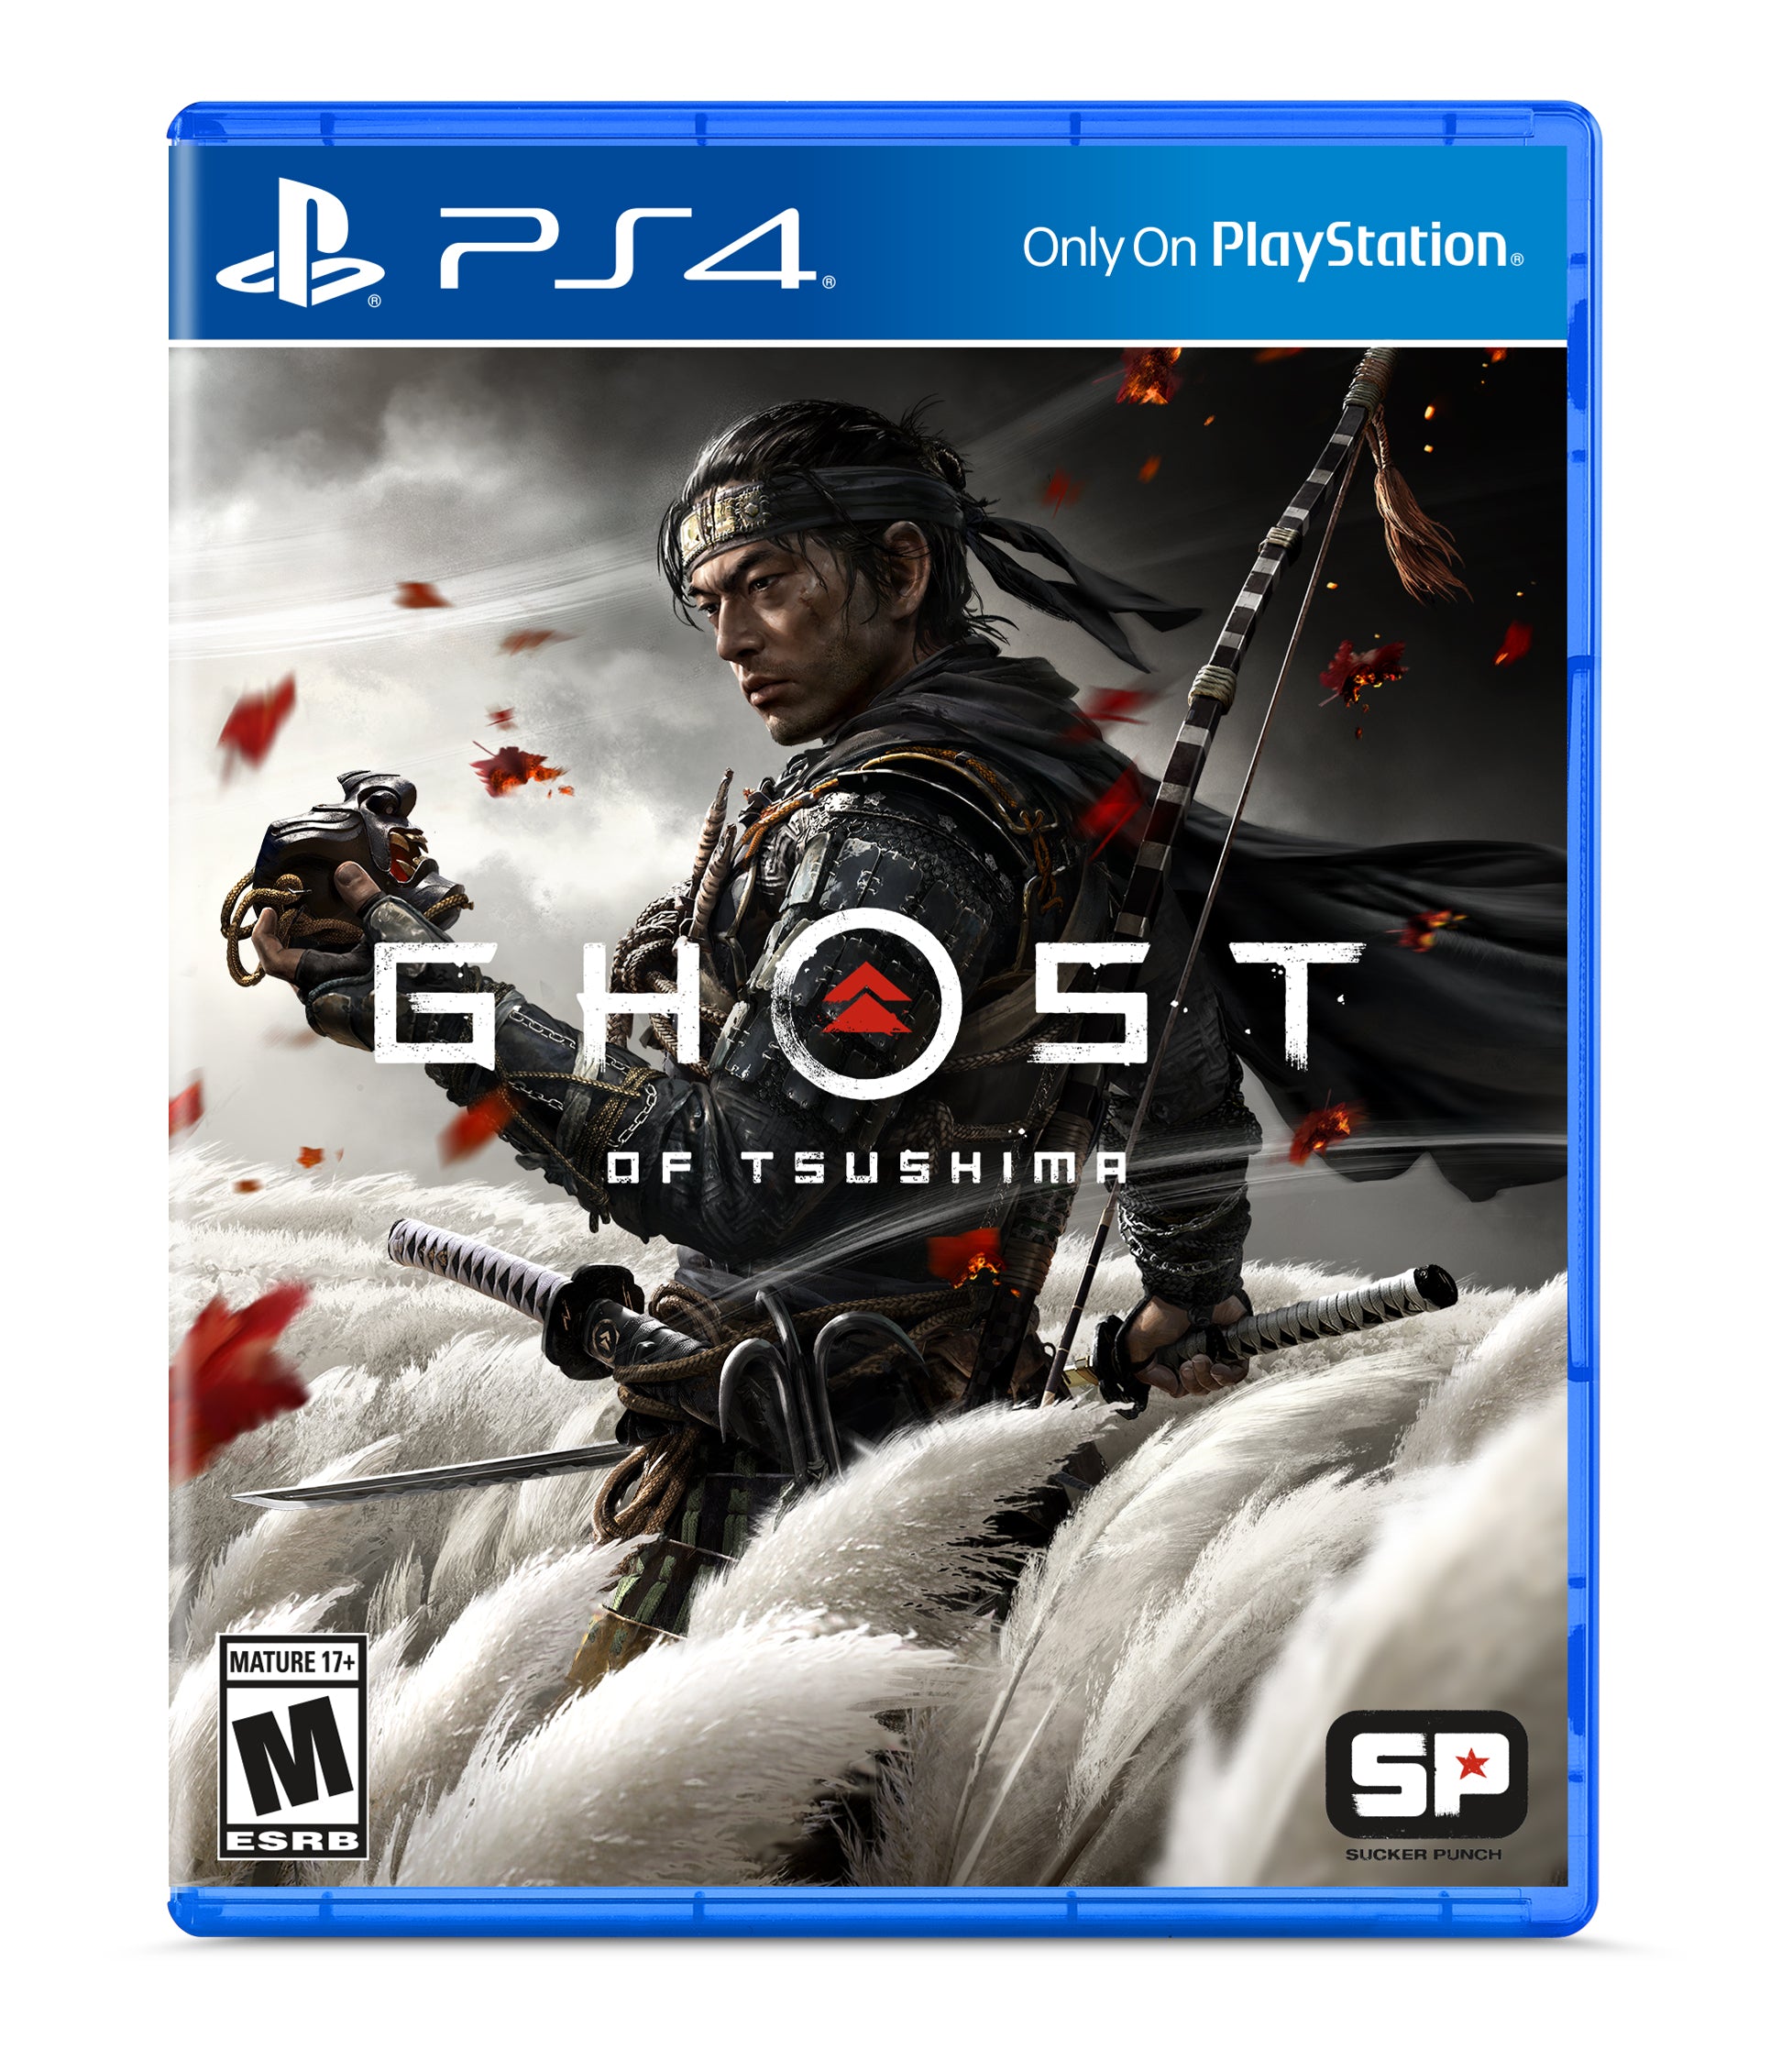 PlayStation 5 Upgraded 1.8TB Disc Edition God of War Ragnarok Bundle w/ Ghost of Tsushima and Mytrix Controller Charger